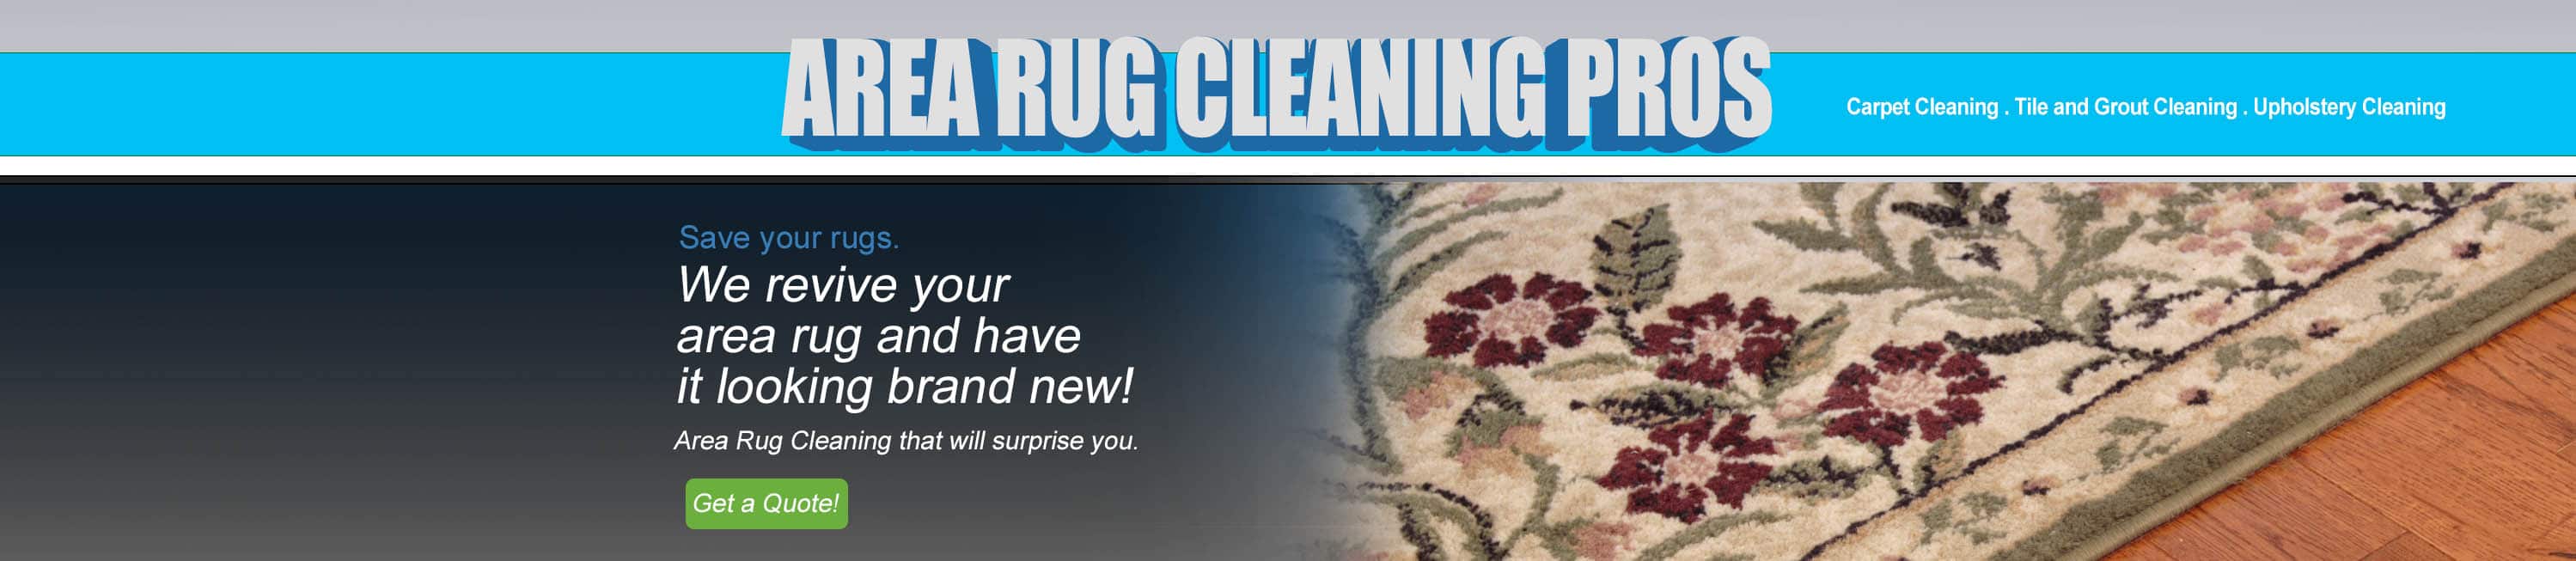 Phoenix area rug cleaning pros